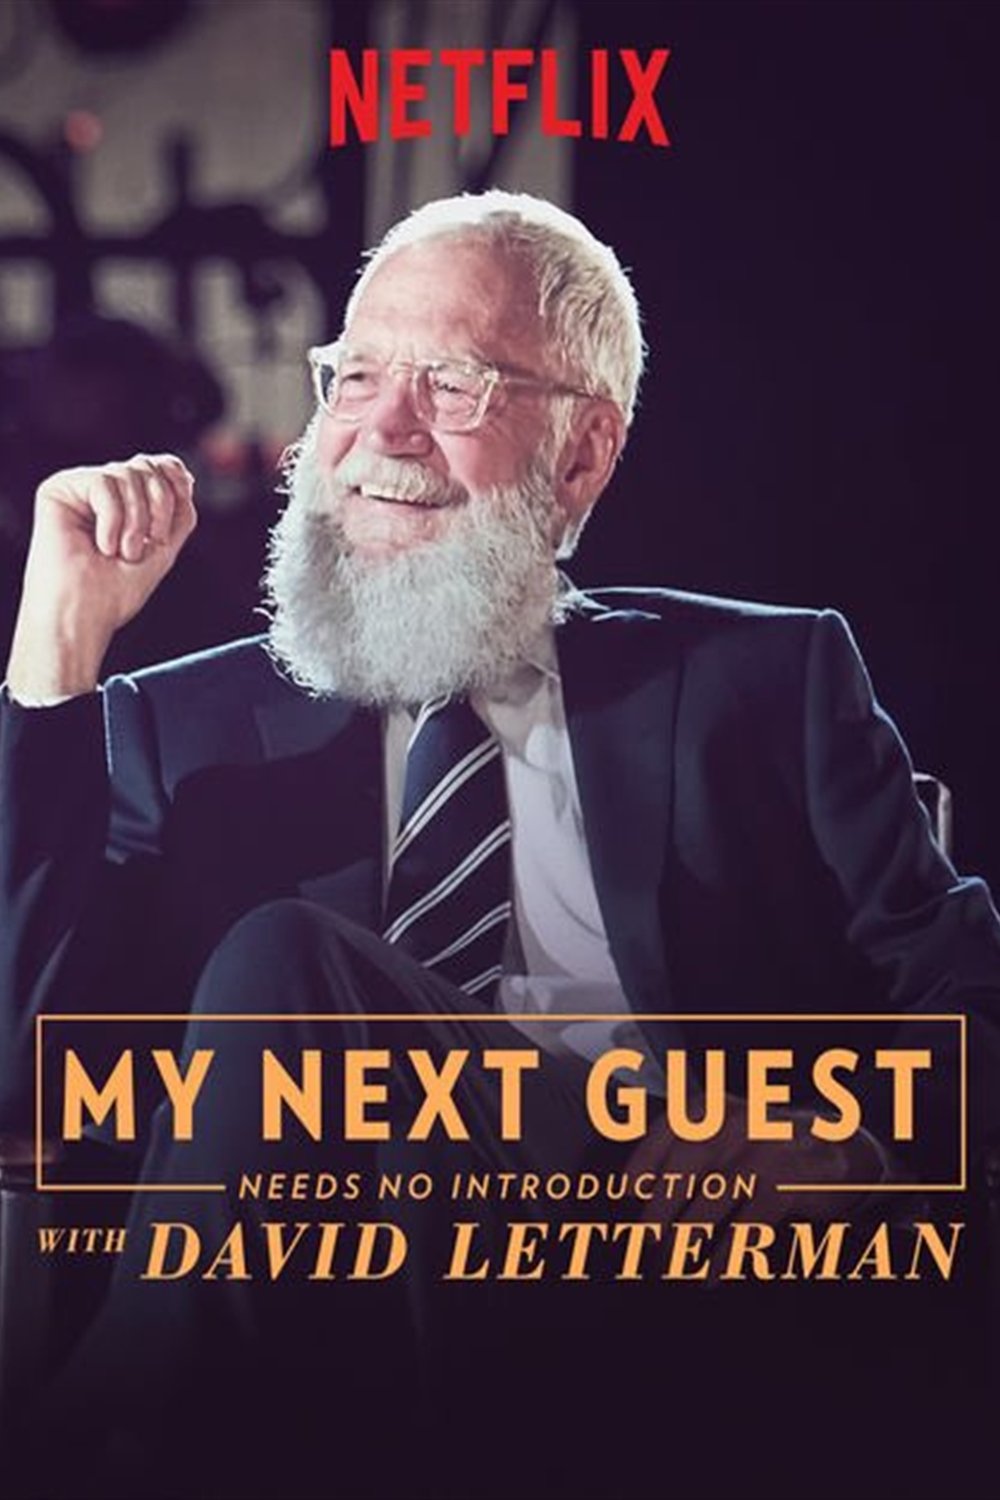 Poster of the movie My Next Guest Needs No Introduction with David Letterman